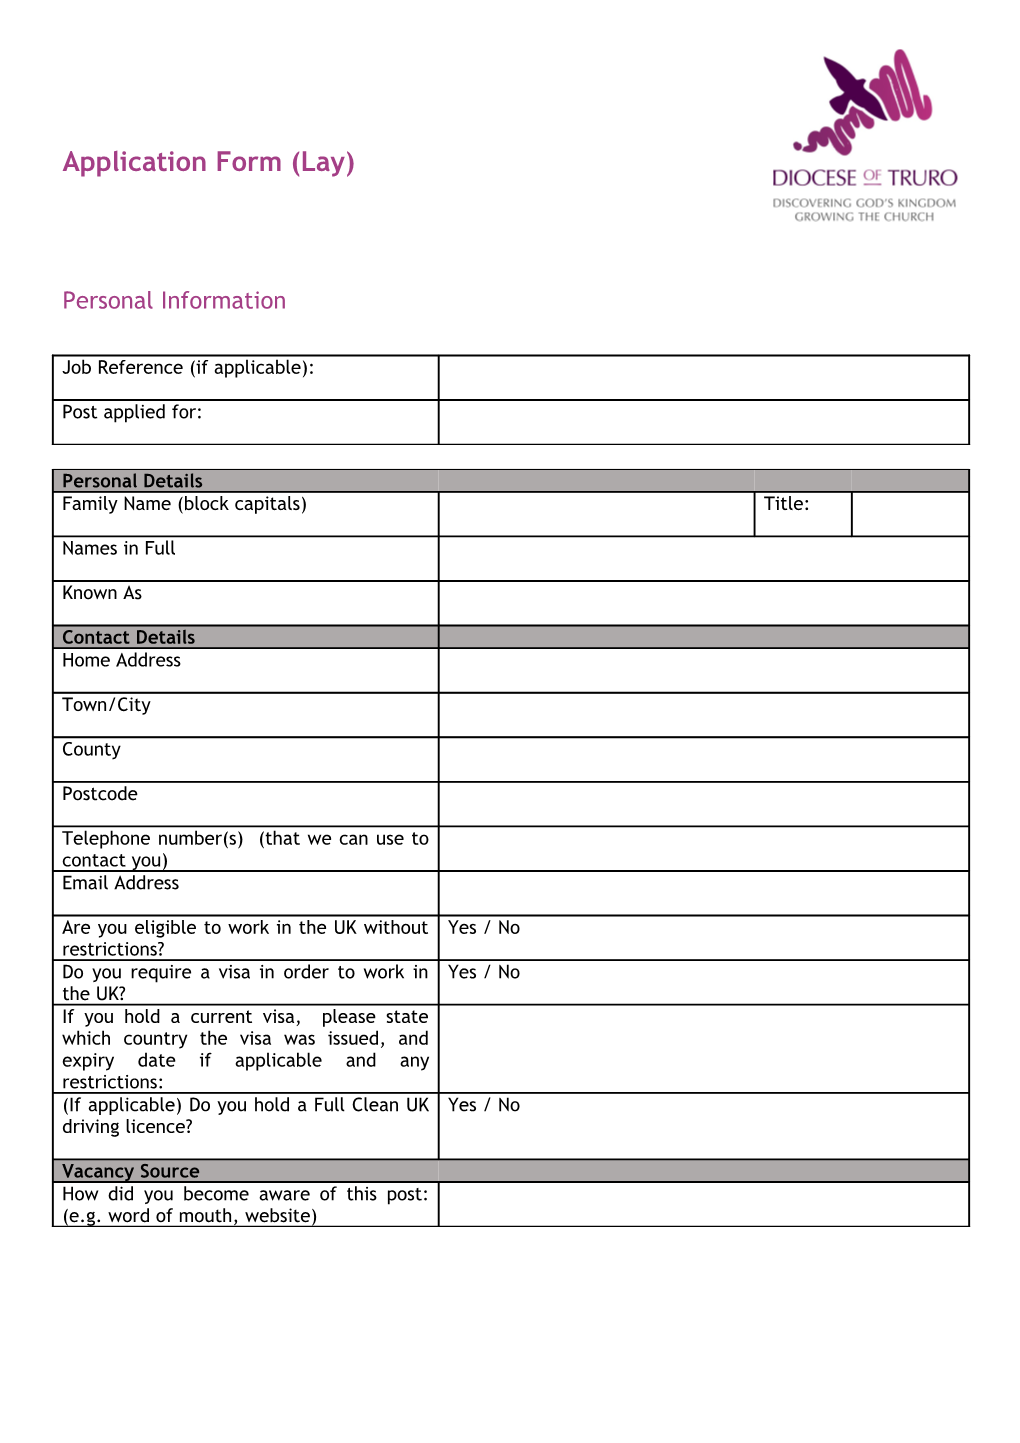 Application Form (Lay)